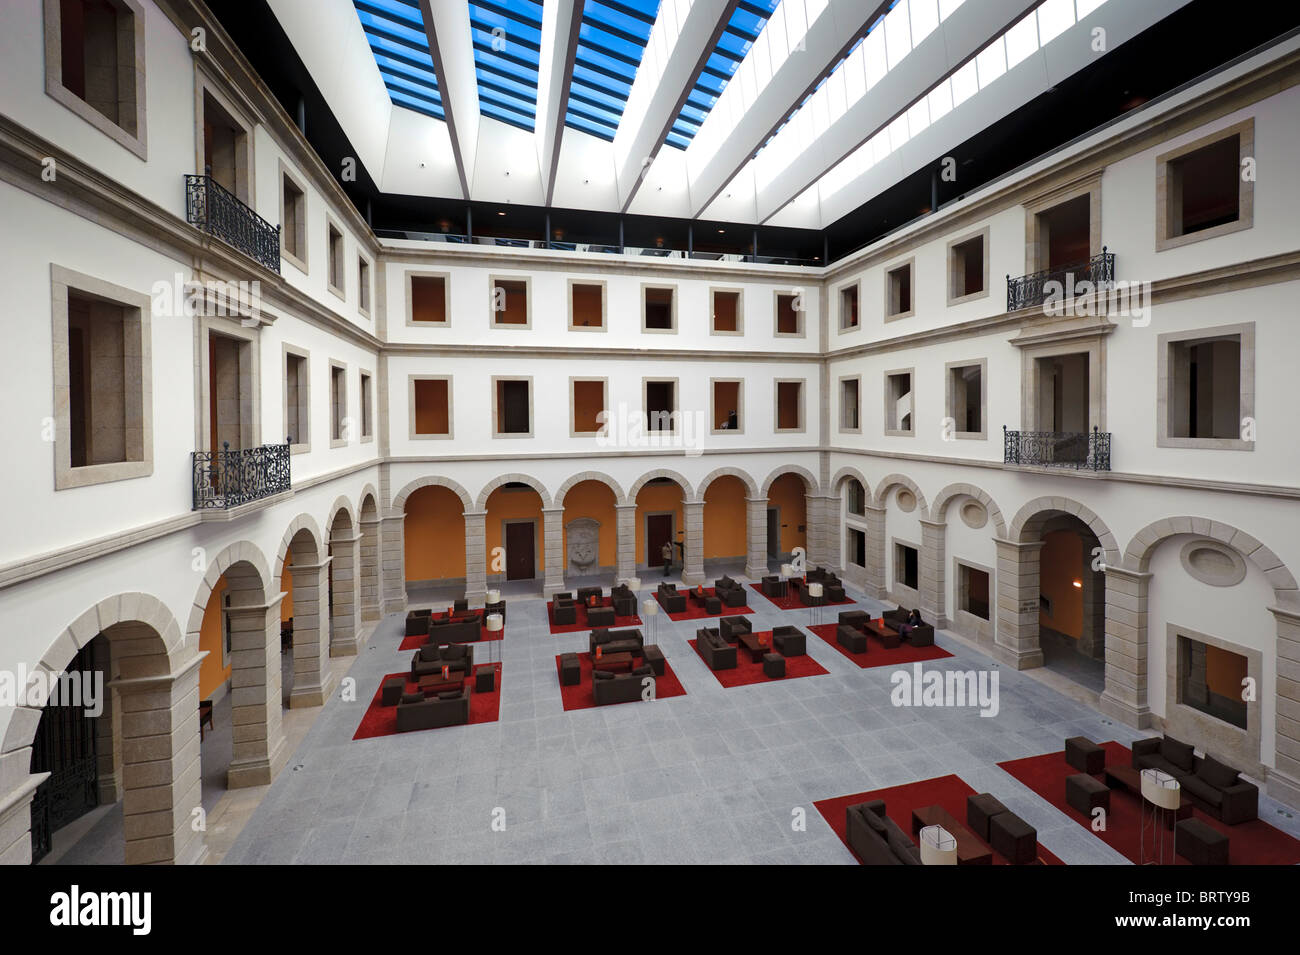 Roofed interior cloister square lobby area at the Pousada de Portugal hotel in Viseu, Portugal Stock Photo